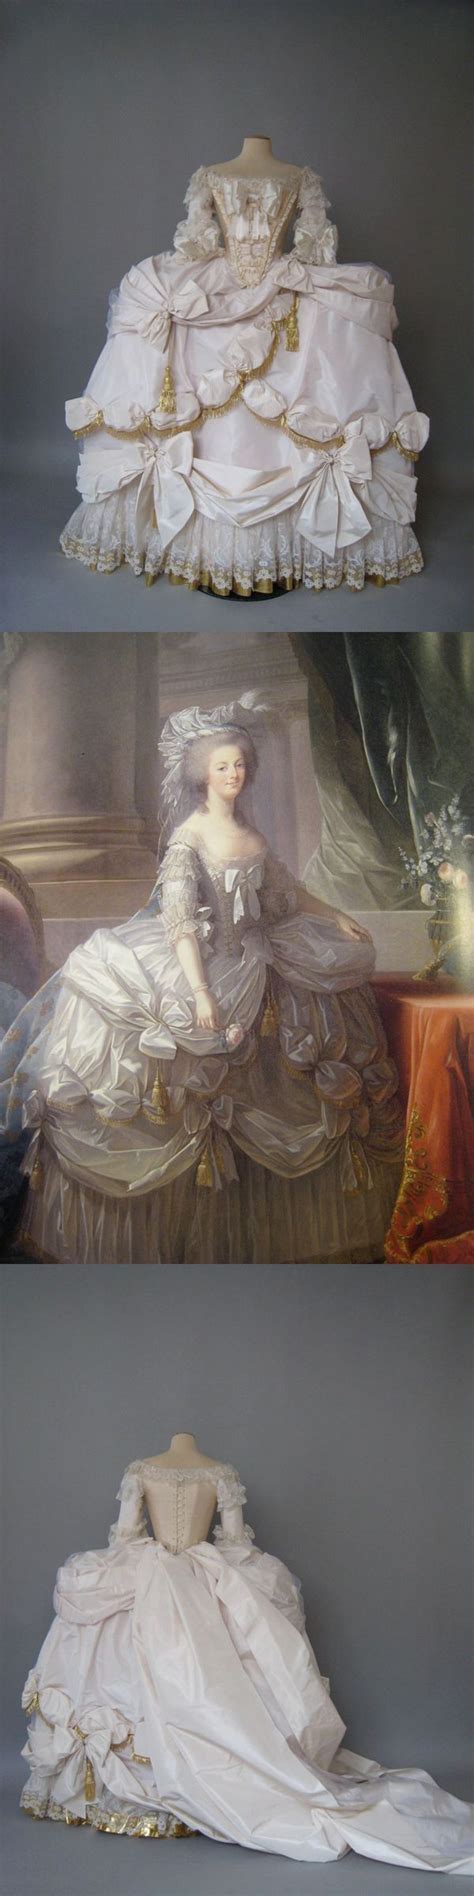 Recreation Of Marie Antoinettes Court Gown Robe De Cour As Painted